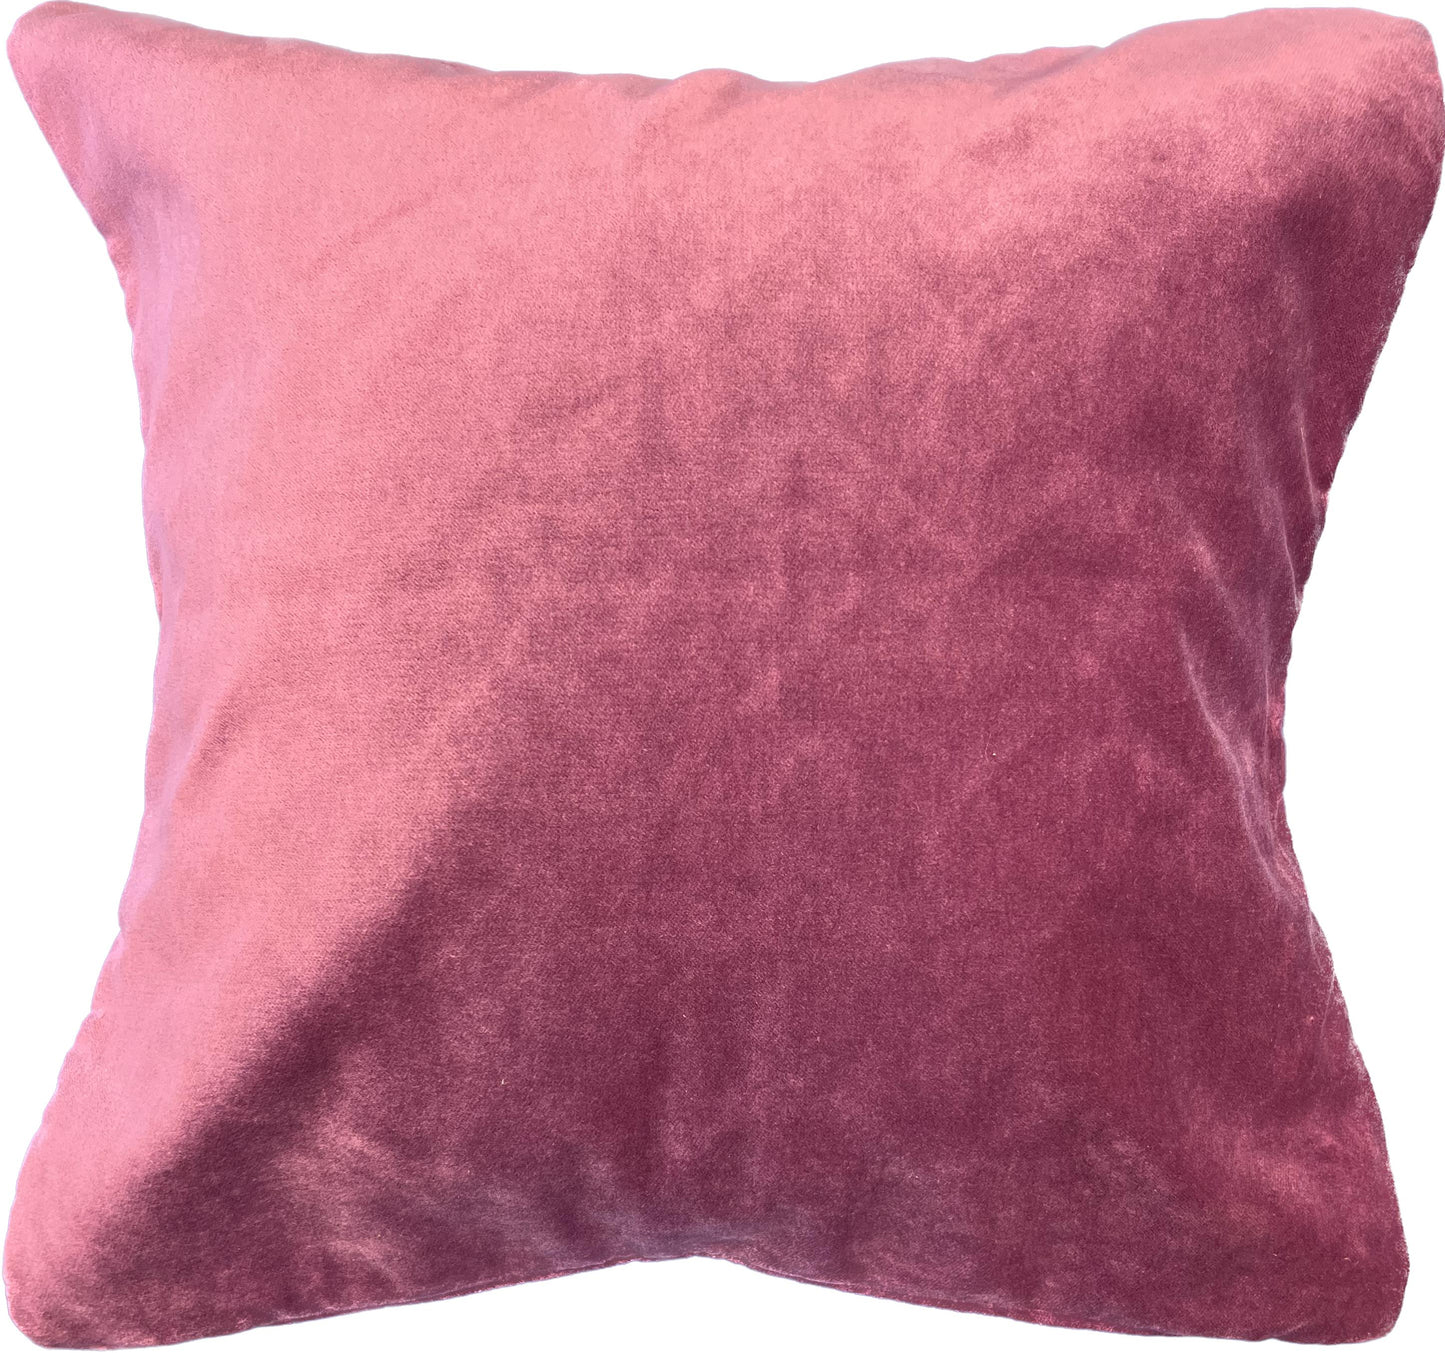 18"x18"  2-Sided Pillow Cover - Face: Clarke & Clarke: F0936/03 Healey - Heather / Back: Solid